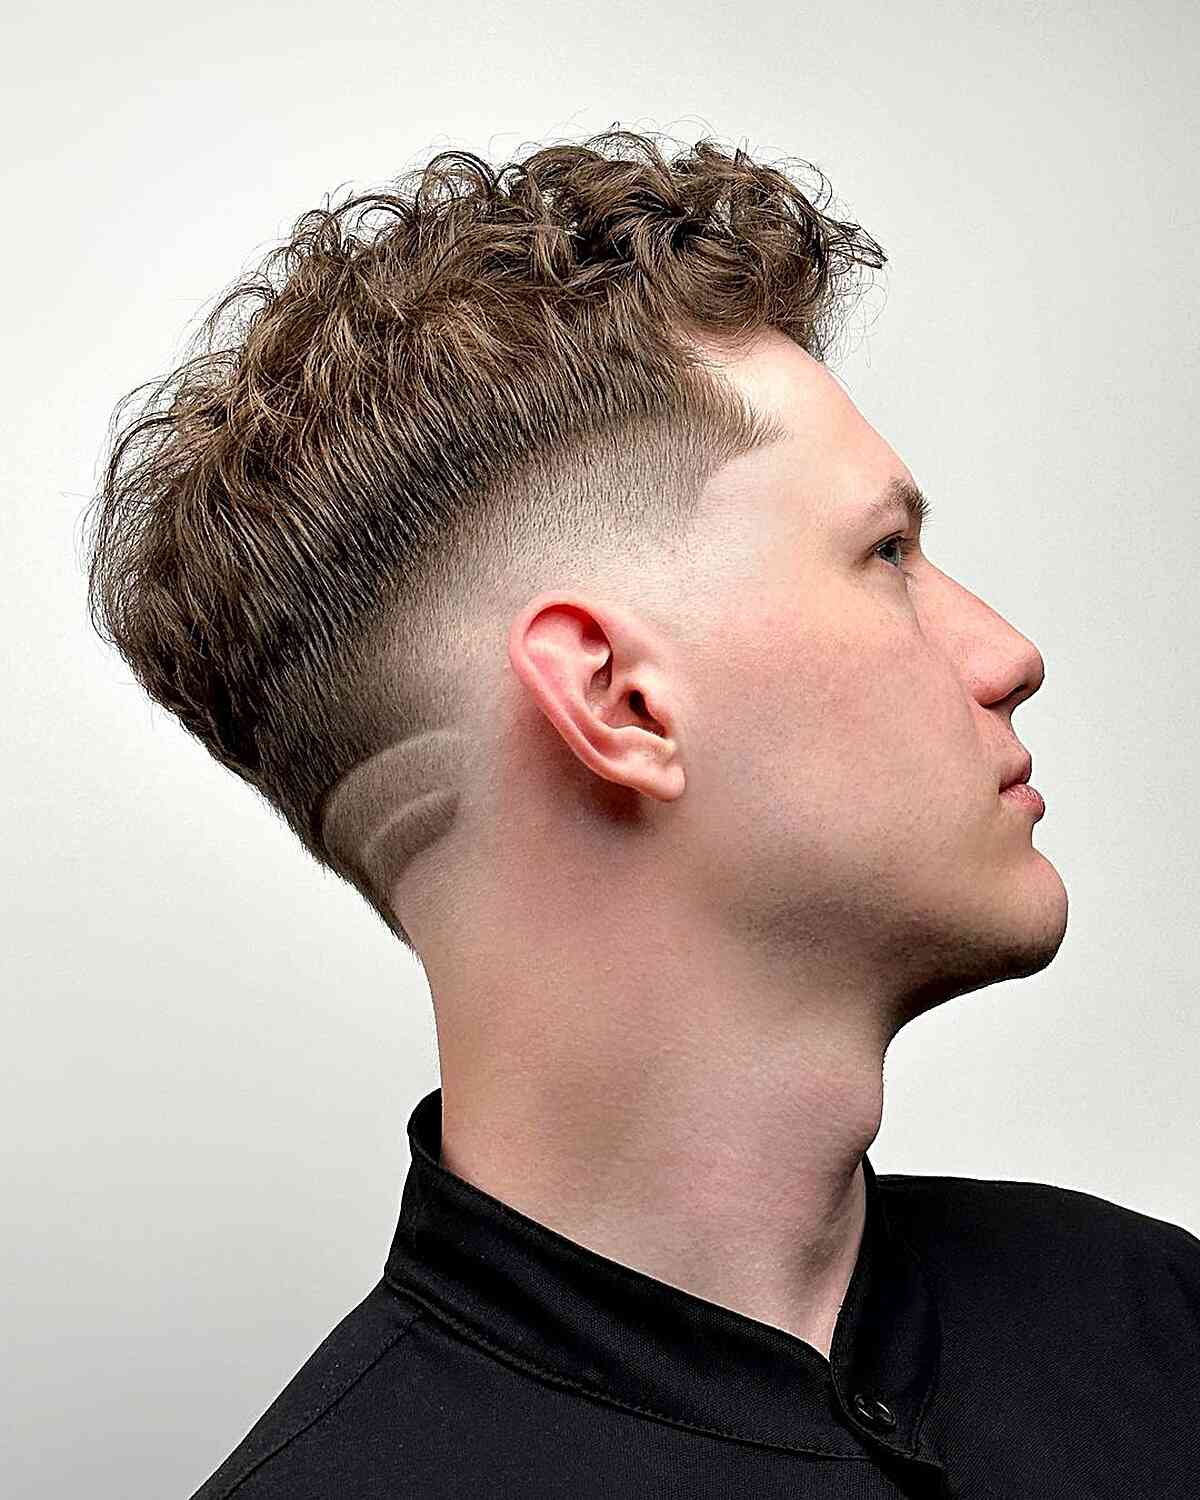 Handsome Drop Fade Cut with Designs and Textured Bangs for Guys with wavy hair